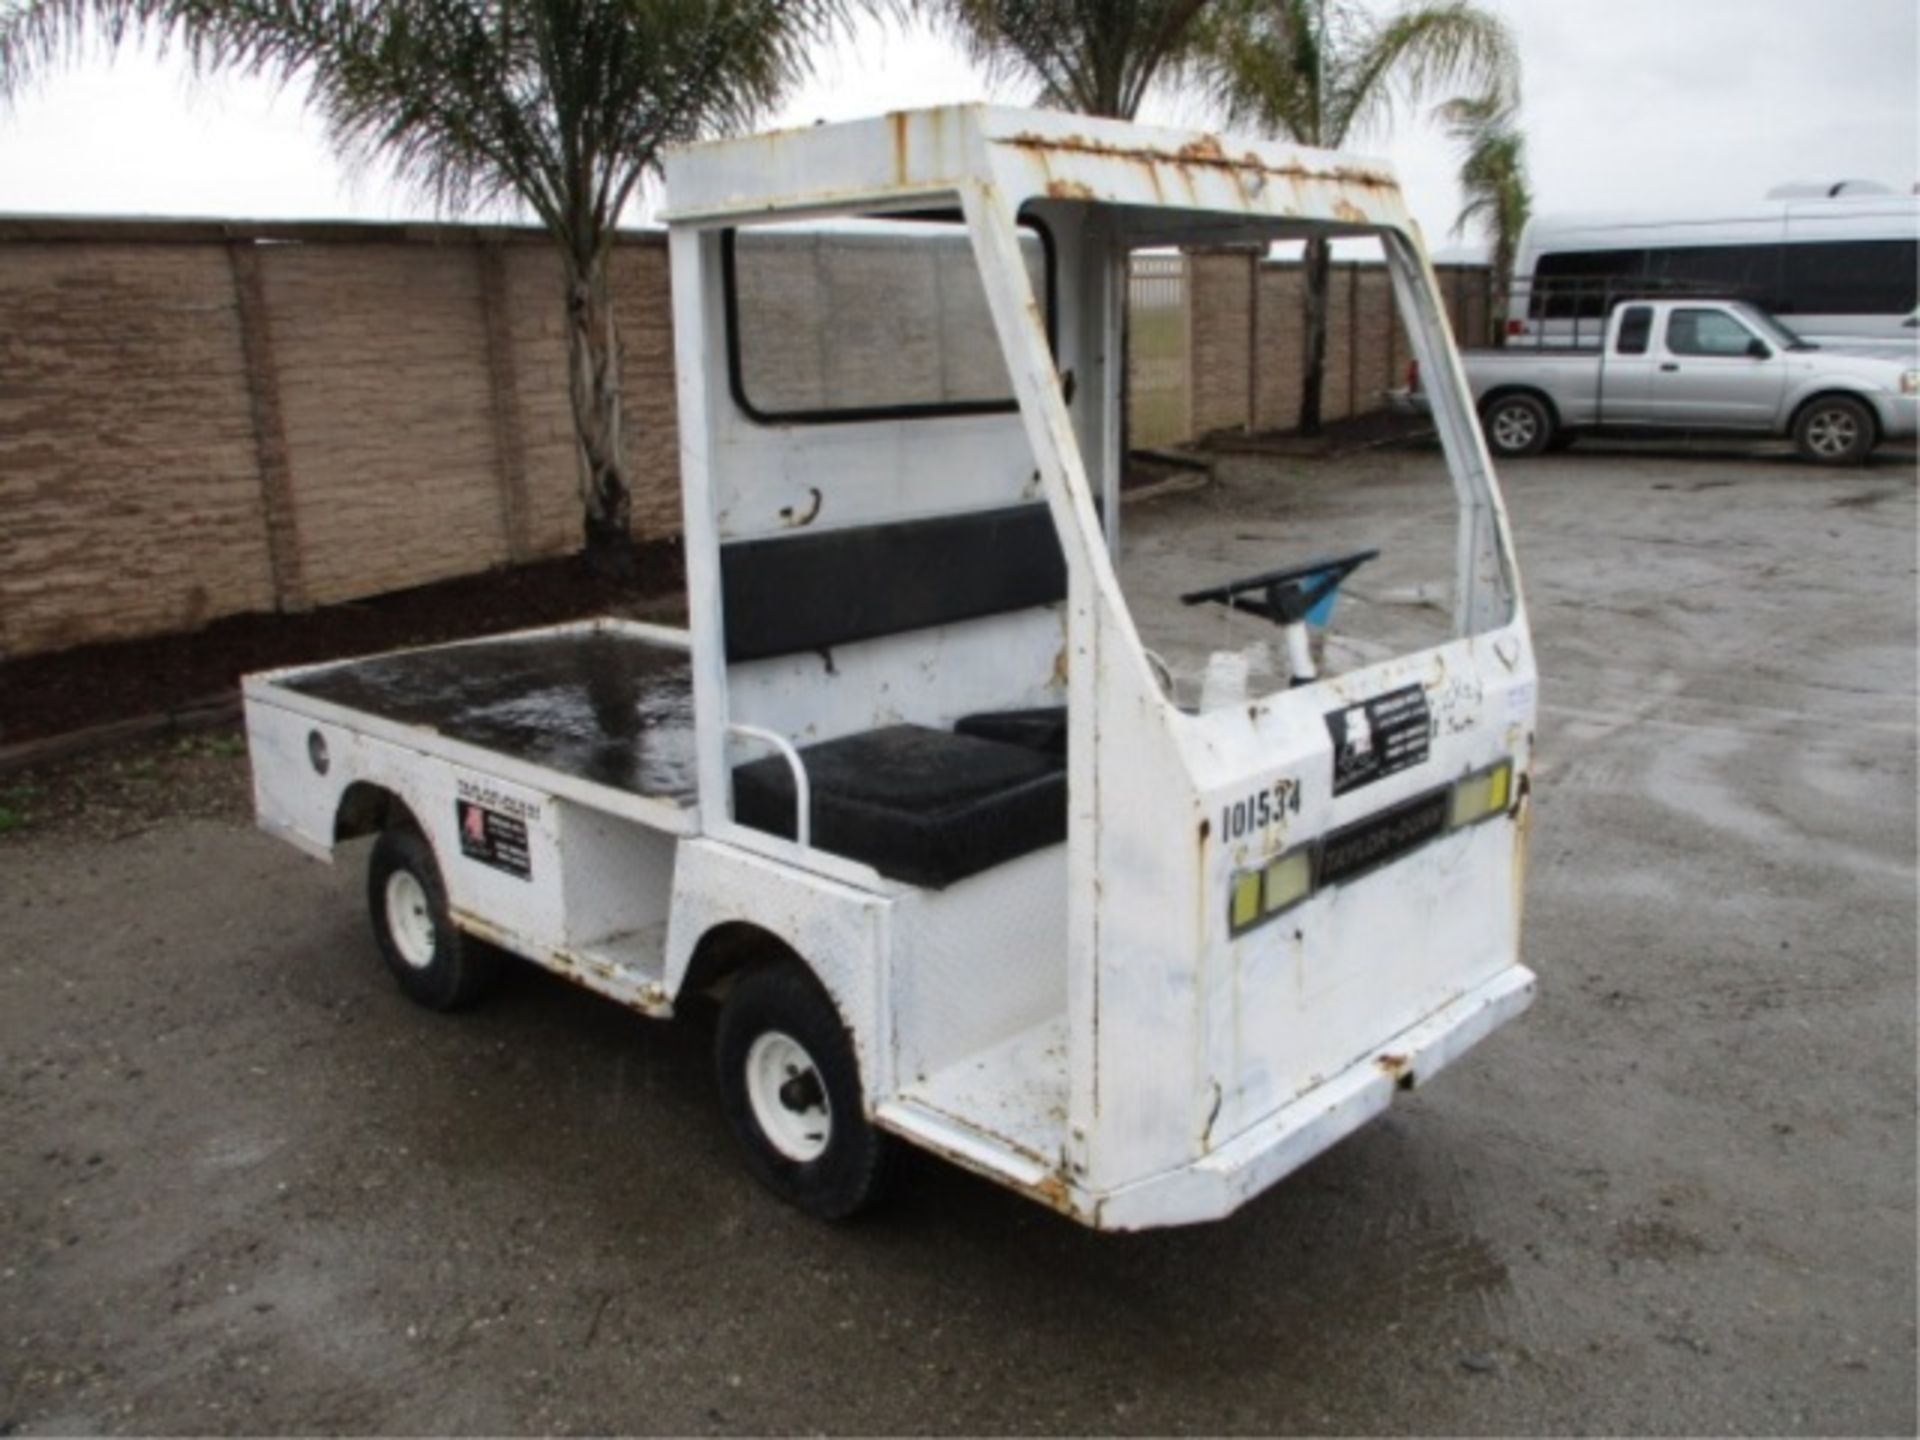 Taylor-Dunn Utility Cart, Gas, Rear Flatbed, Canopy, S/N: 101534 - Image 8 of 35